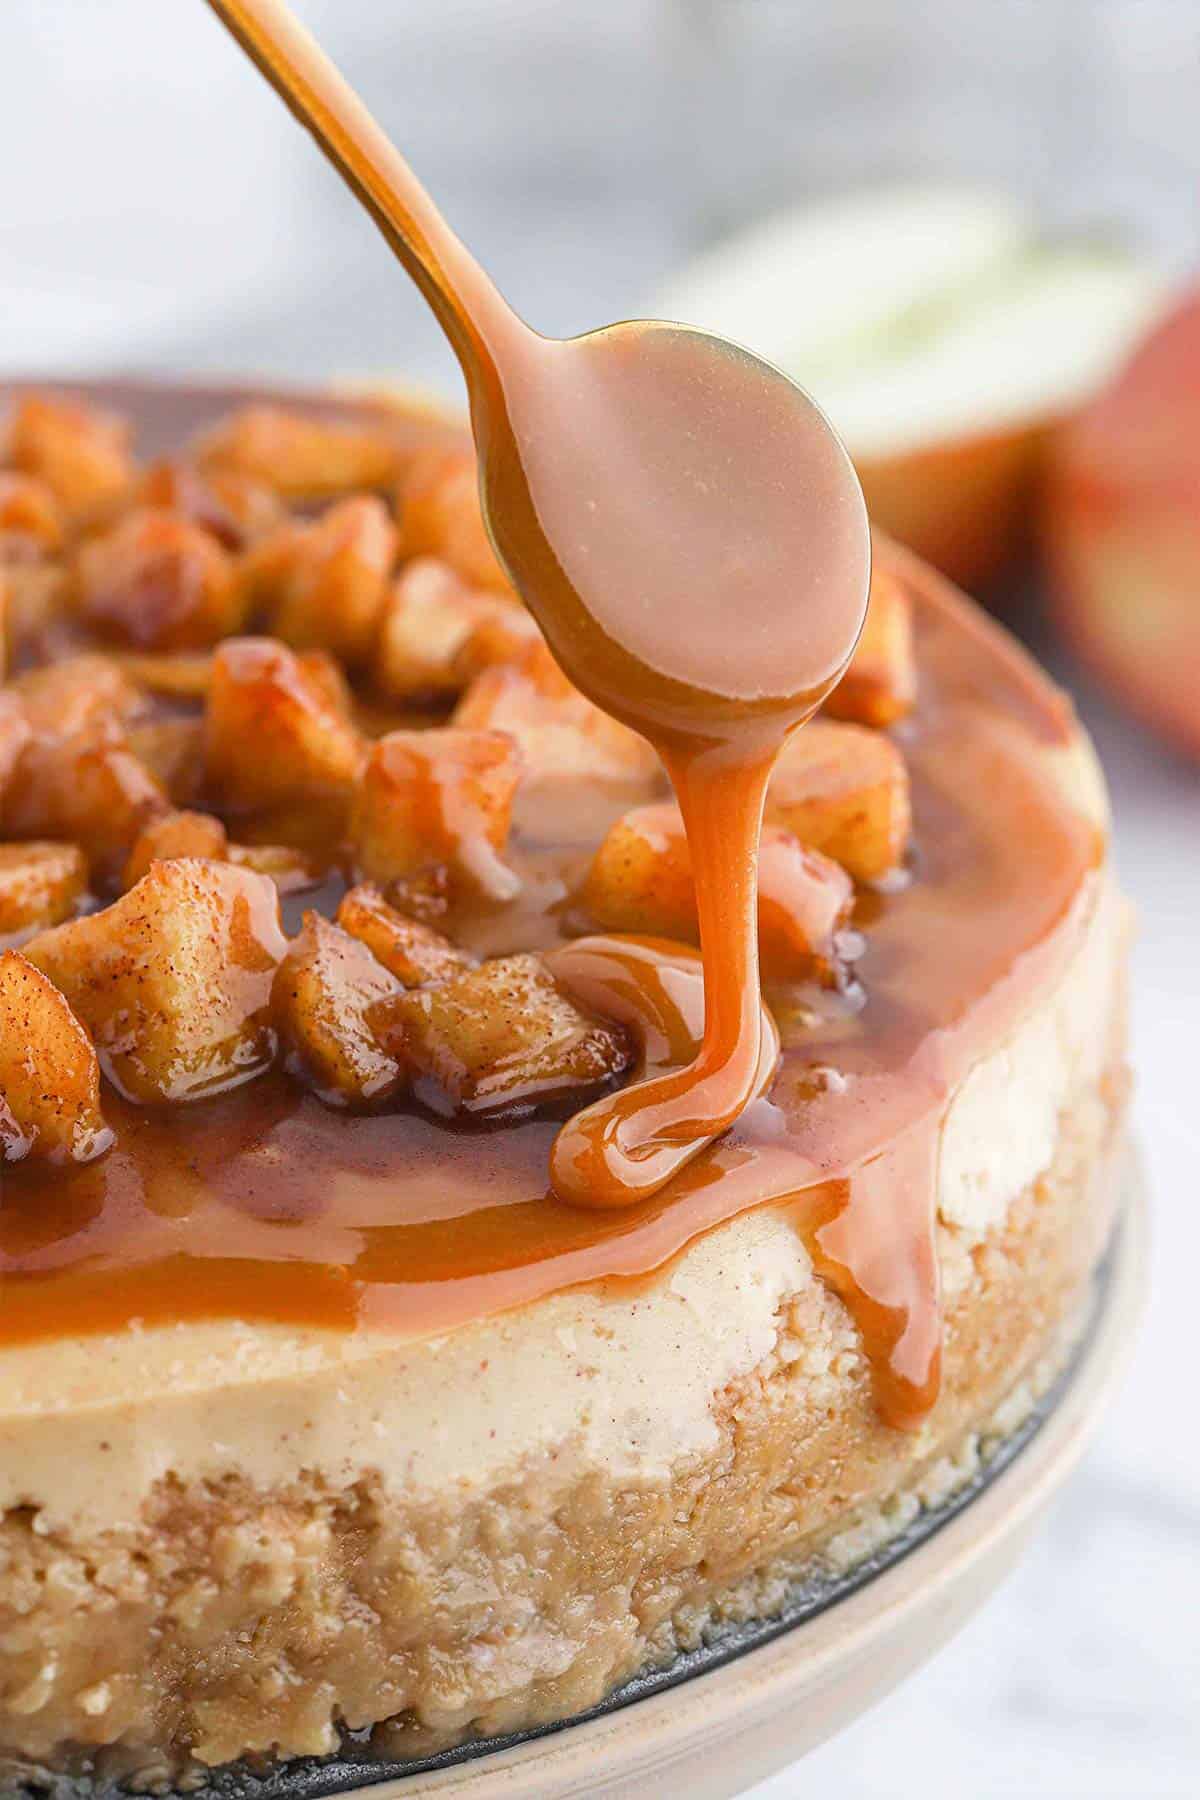 A spoon drizzling caramel sauce over the top of apple caramel cheesecake.